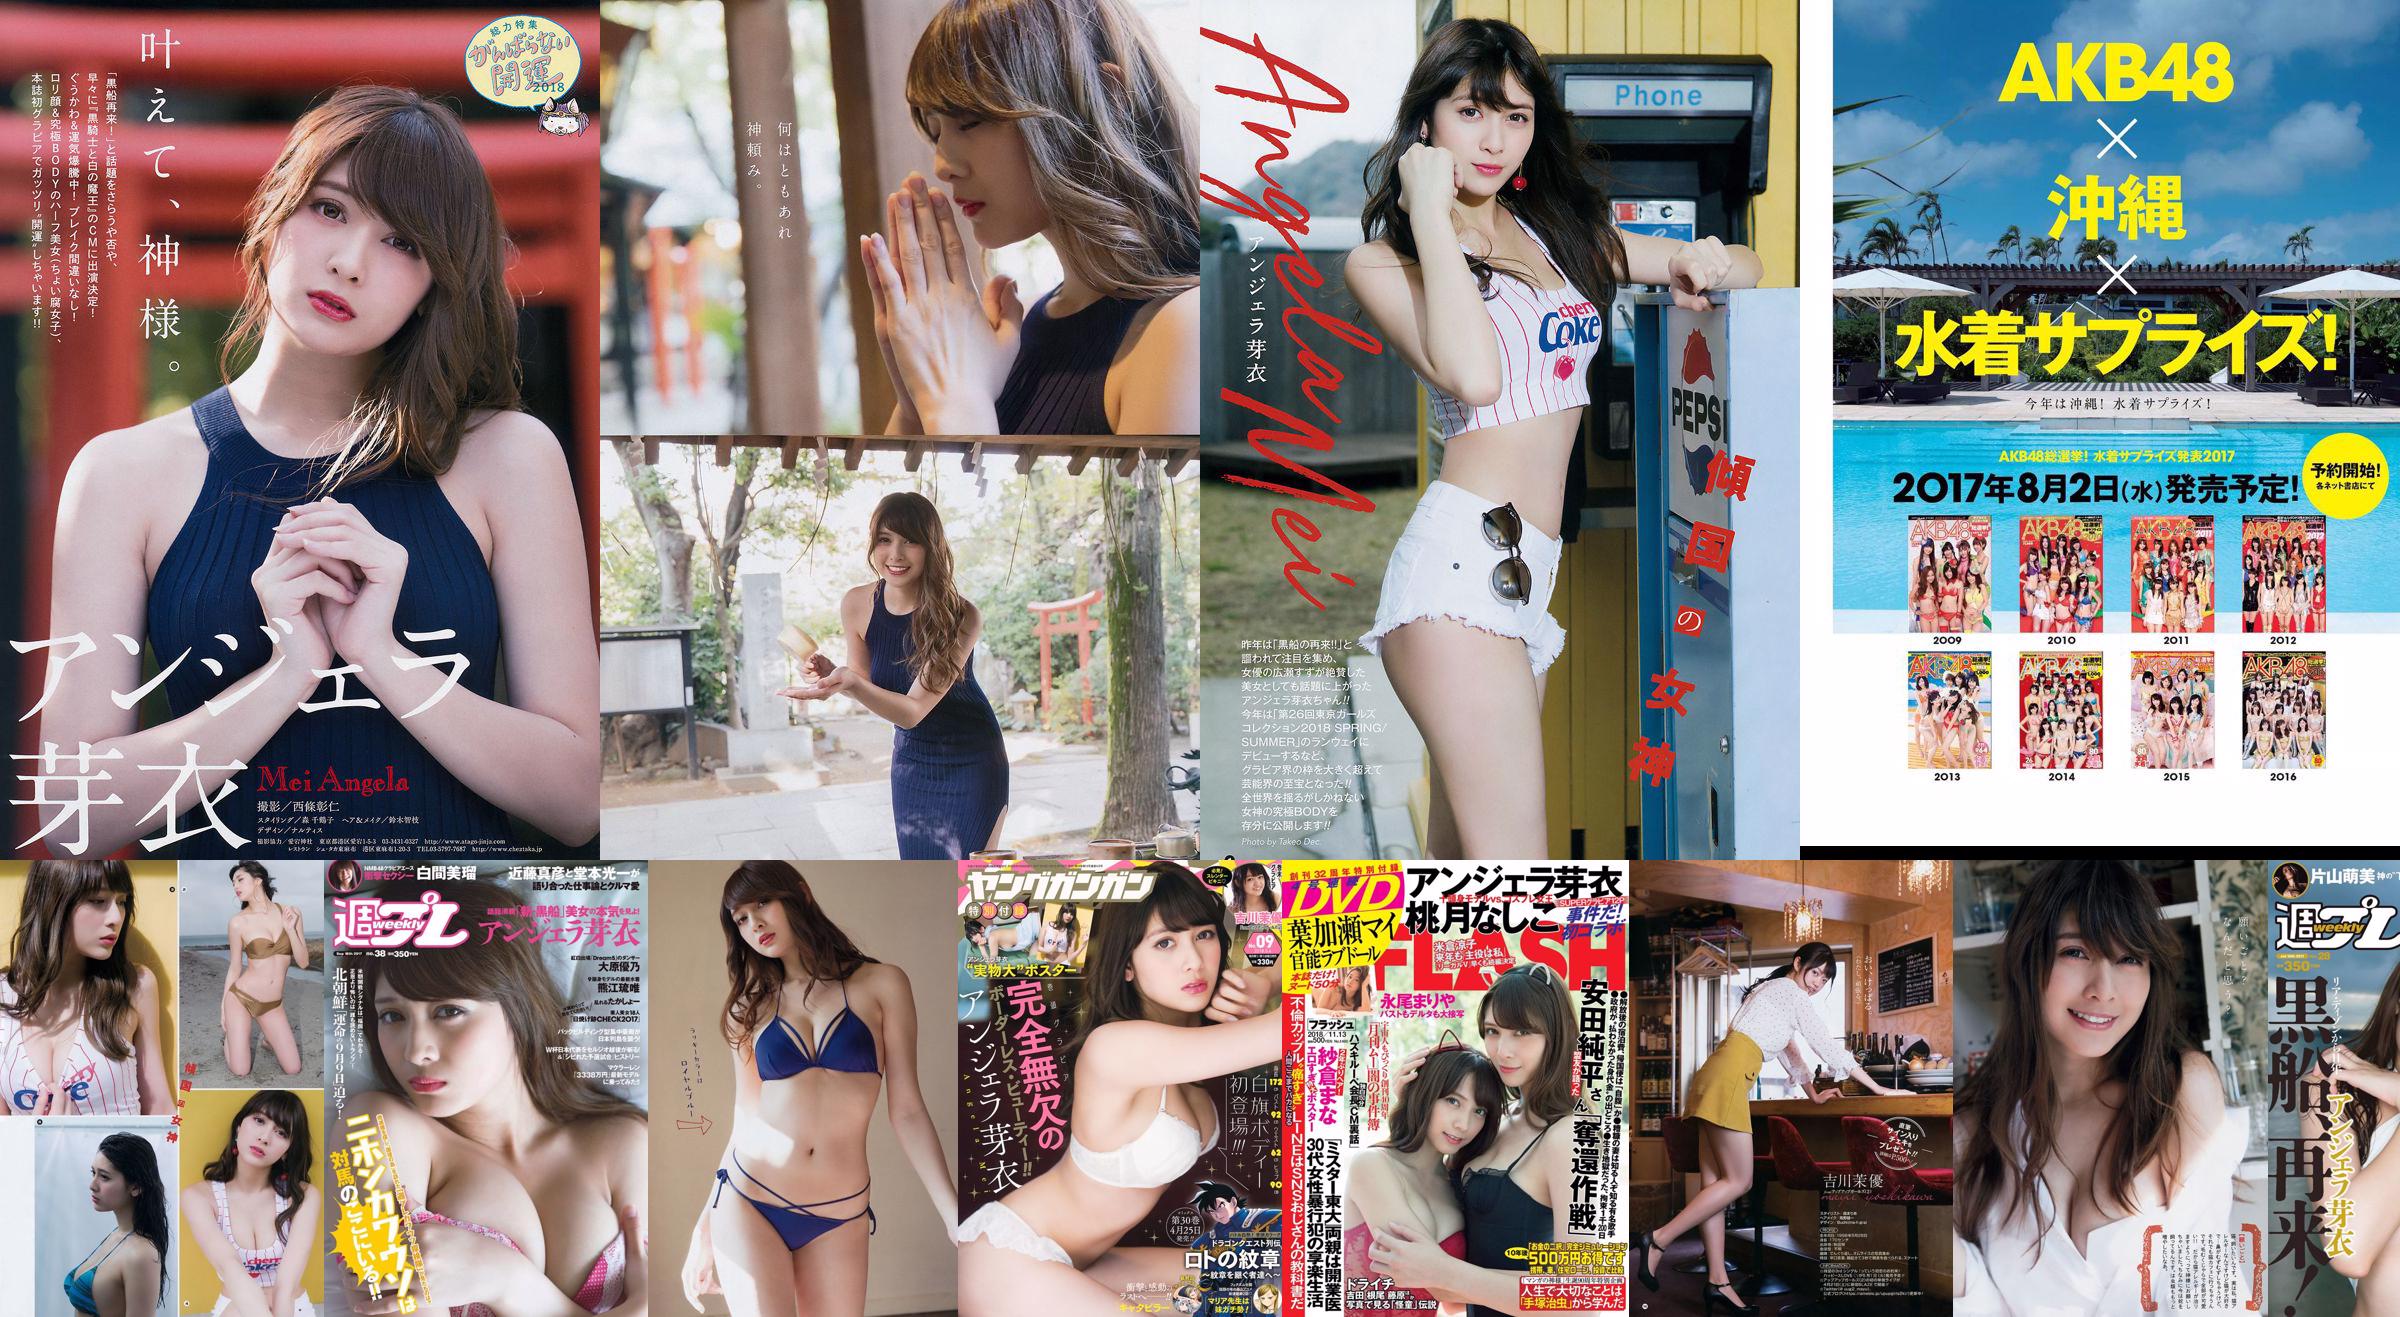 Oeuf-Younis "Sexy Lingerie Charm" (YouMi YouMi) Vol.129 No.ebff93 Page 1